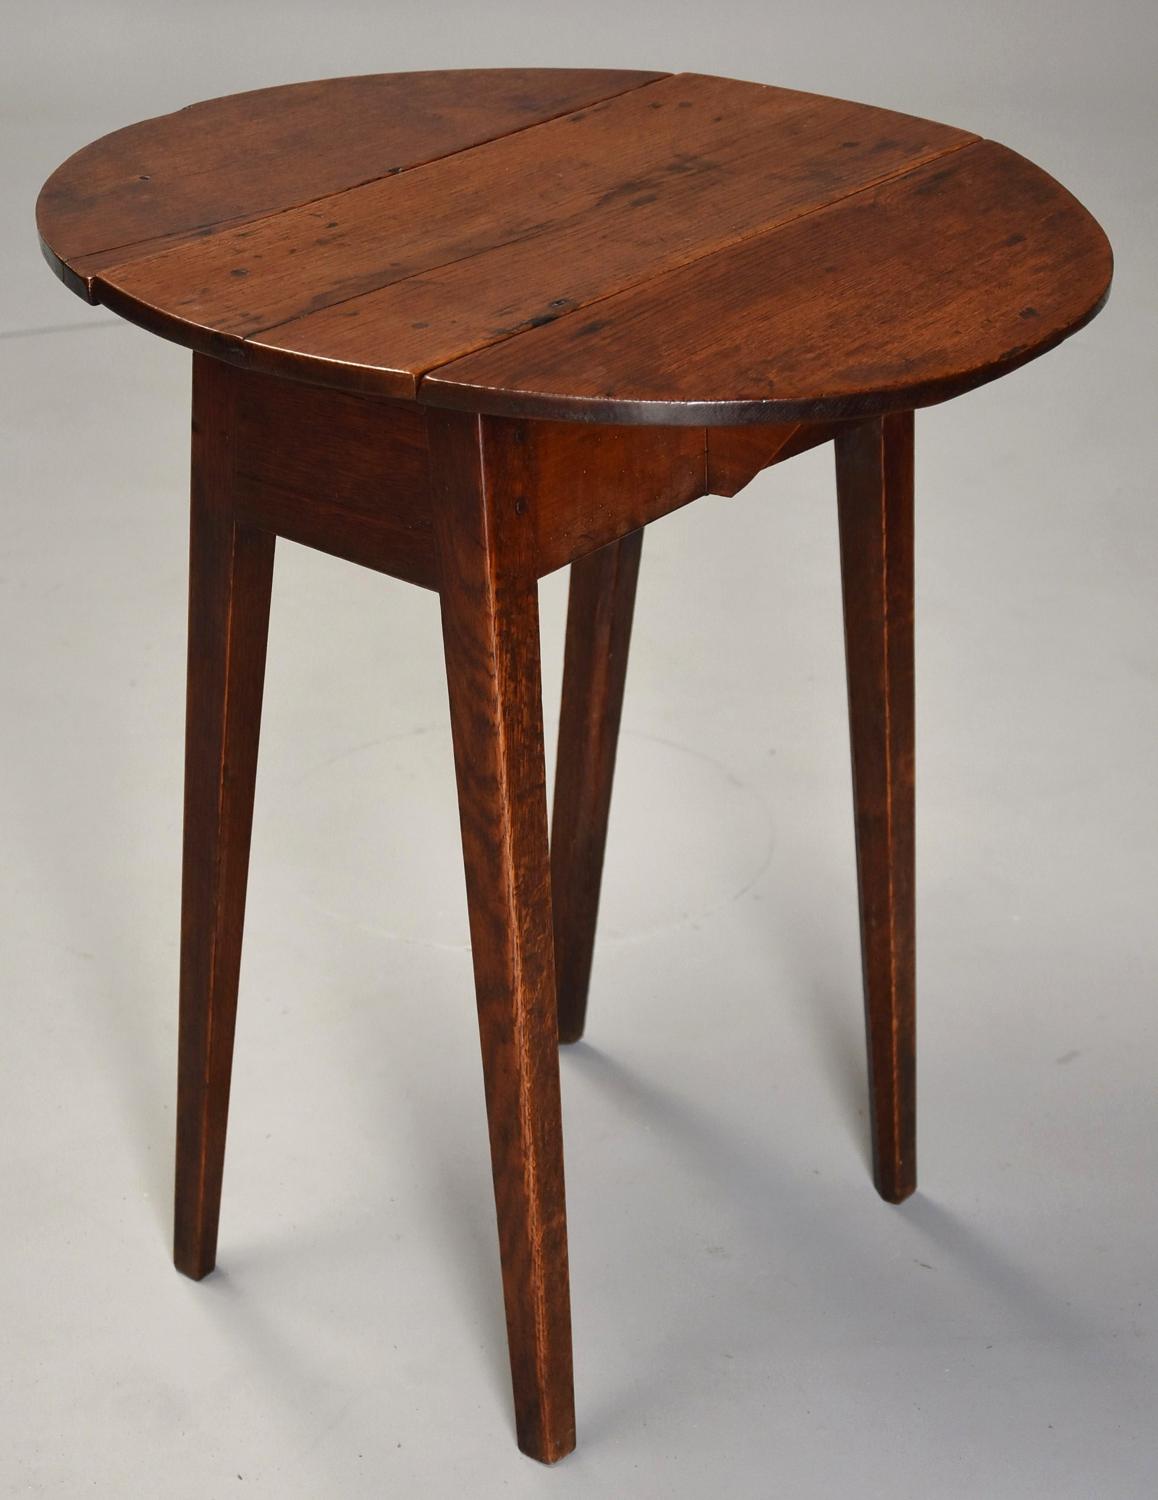 Rare late 18th century ash & oak drop leaf table of small proportions